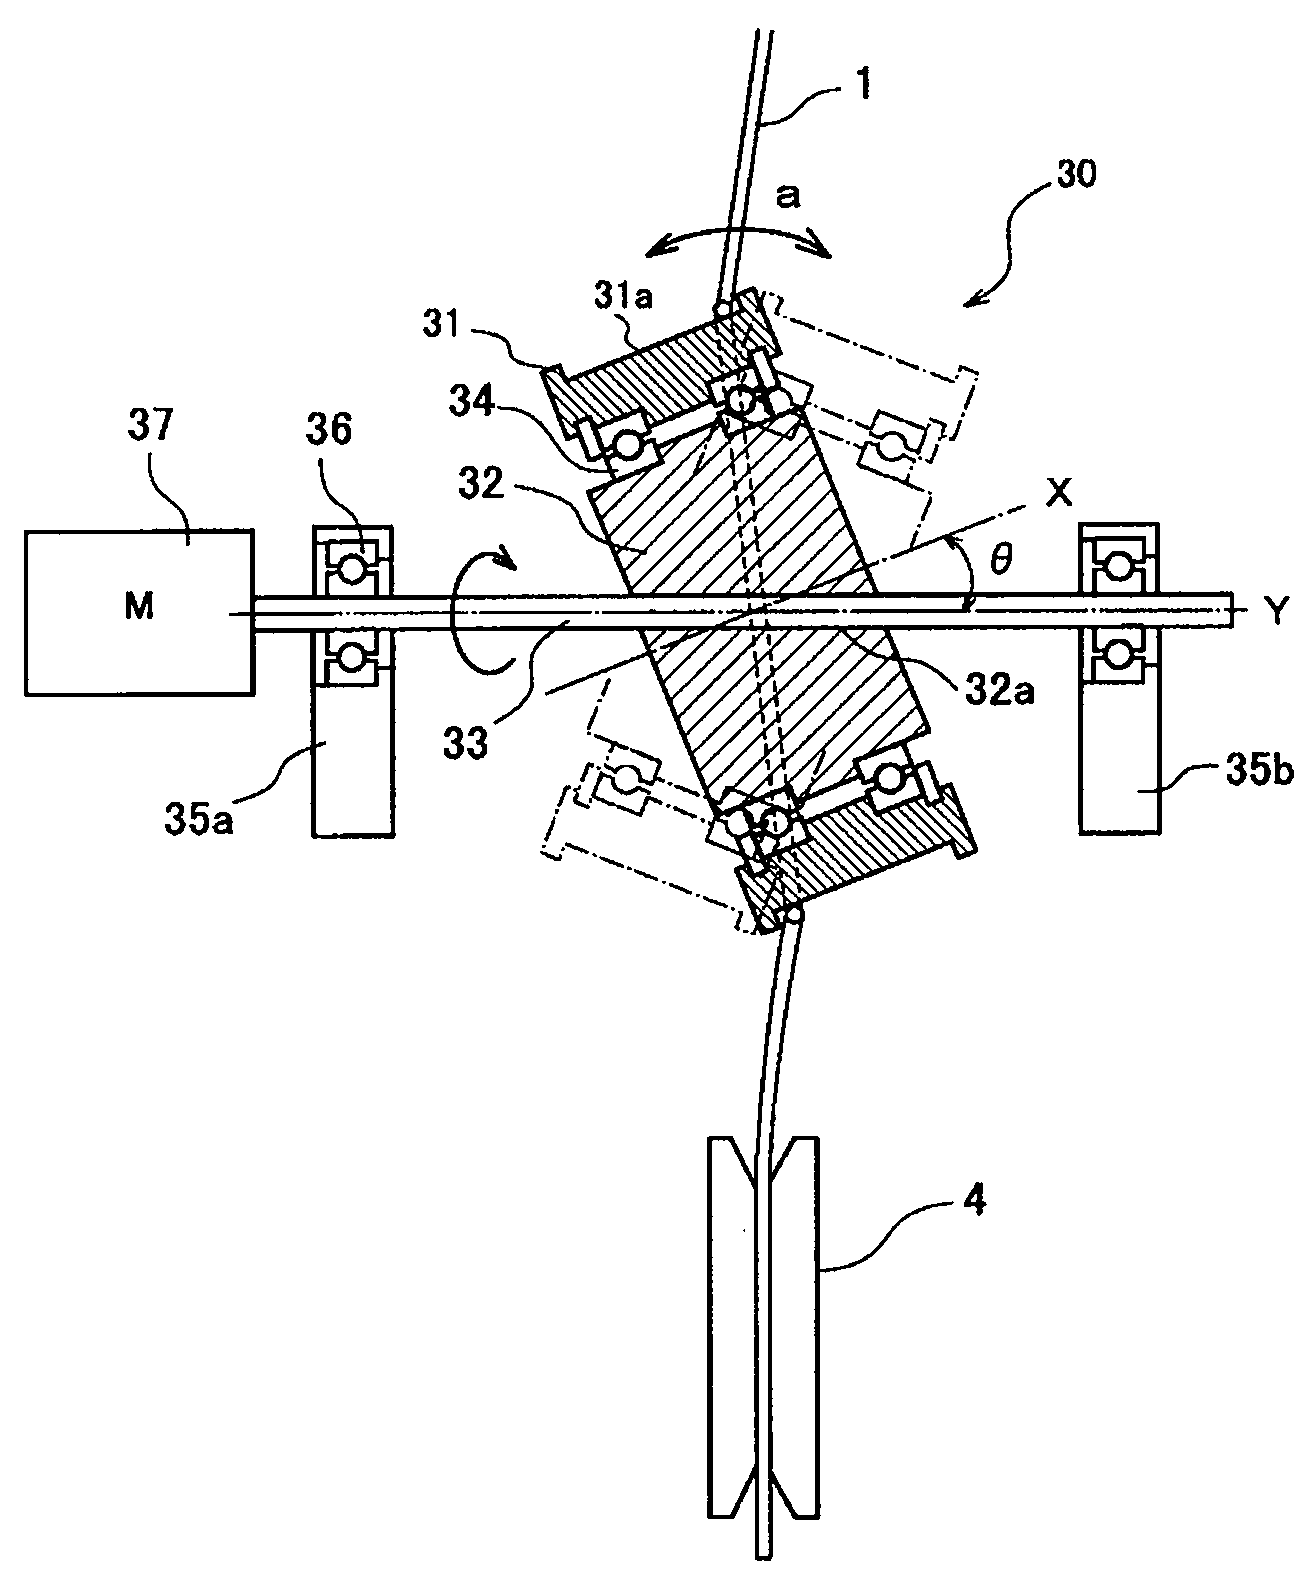 Equipment and method for manufacturing an optical fiber